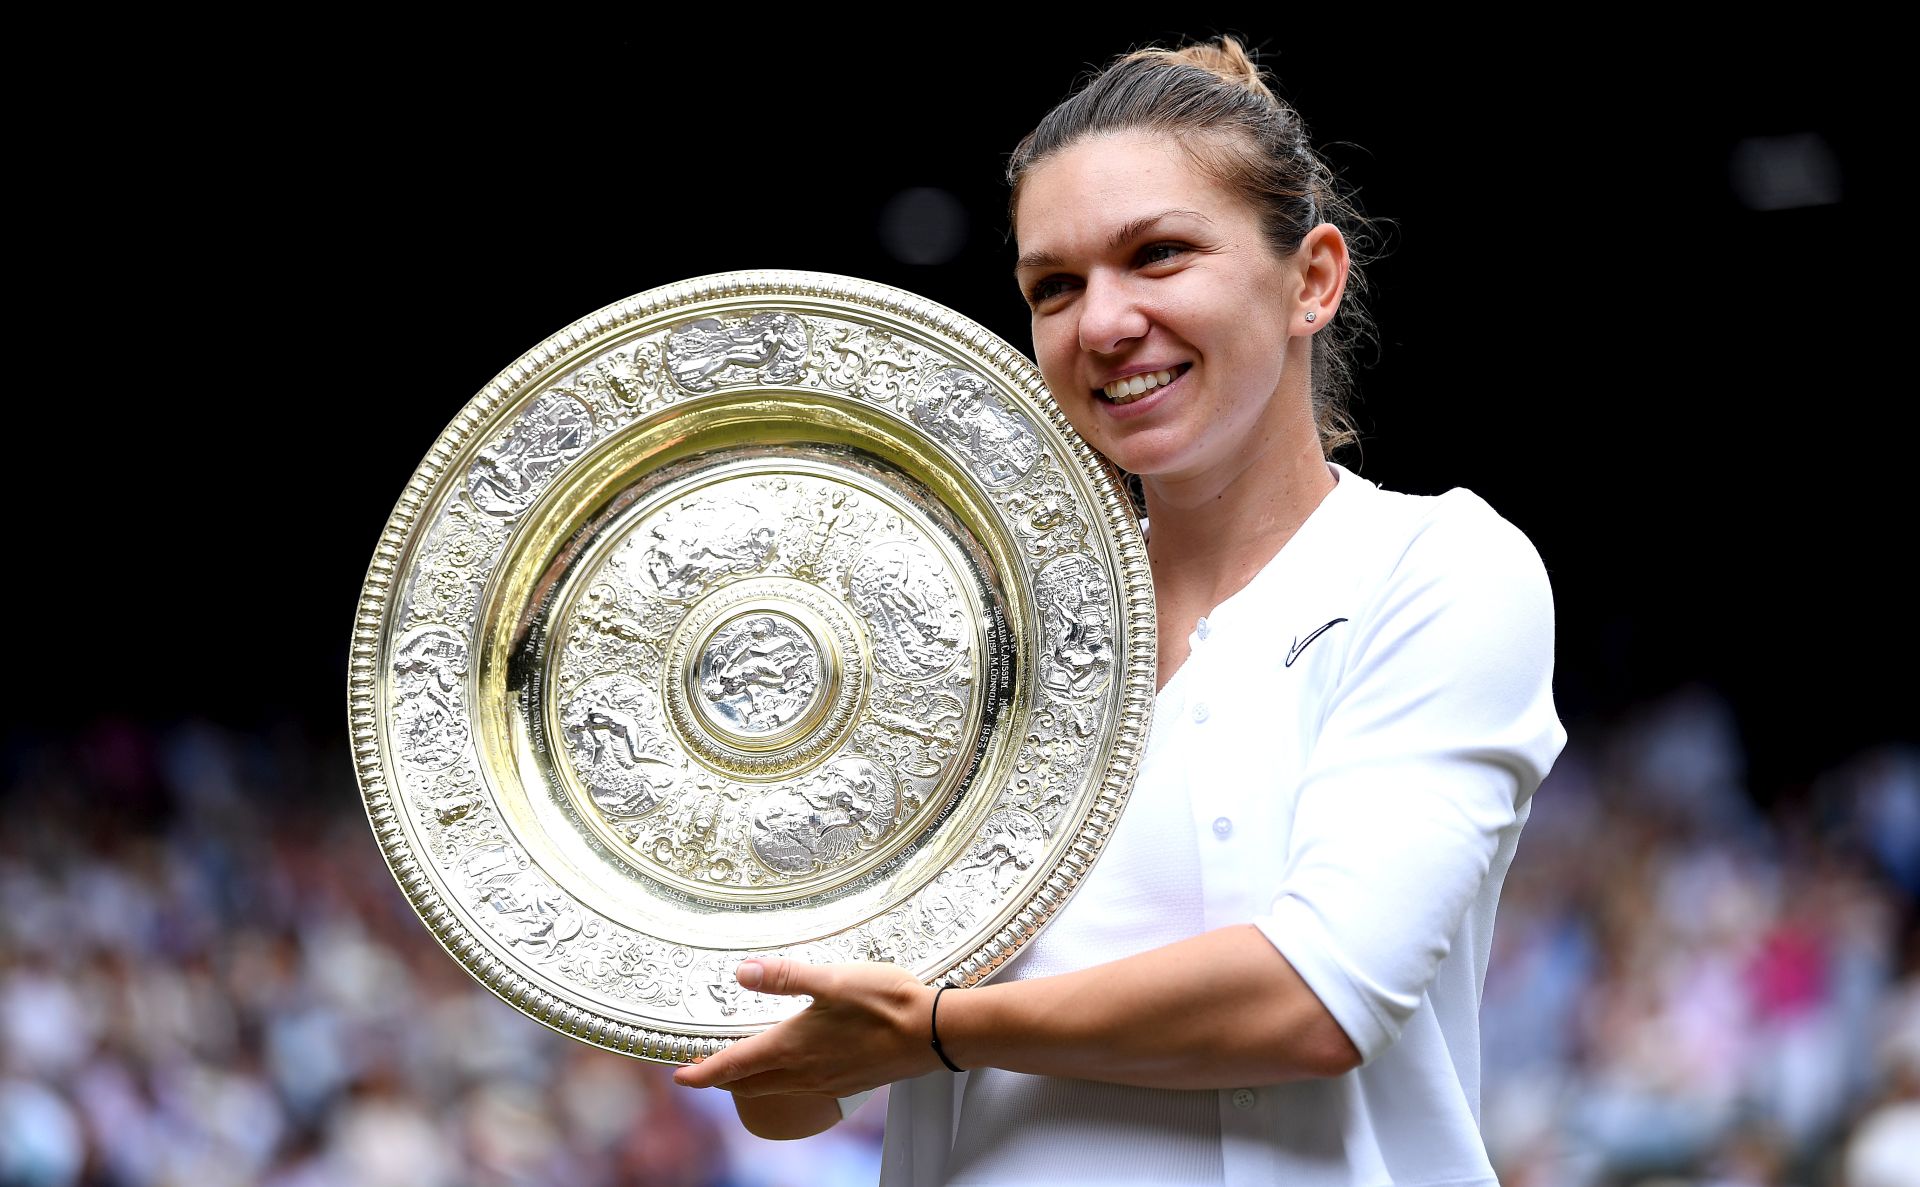 epa07714738 Simona Halep of Romania with the championship trophy as she celebrates her victory over Serena Williams of the US in the women's final of the Wimbledon Championships at the All England Lawn Tennis Club, in London, Britain, 13 July 2019. EPA/Laurence Griffiths / POOL EDITORIAL USE ONLY/NO COMMERCIAL SALES *** Local Caption *** LONDON, ENGLAND - JULY 13: during Day twelve of The Championships - Wimbledon 2019 at All England Lawn Tennis and Croquet Club on July 13, 2019 in London, England. (Photo by Laurence Griffiths/Getty Images)